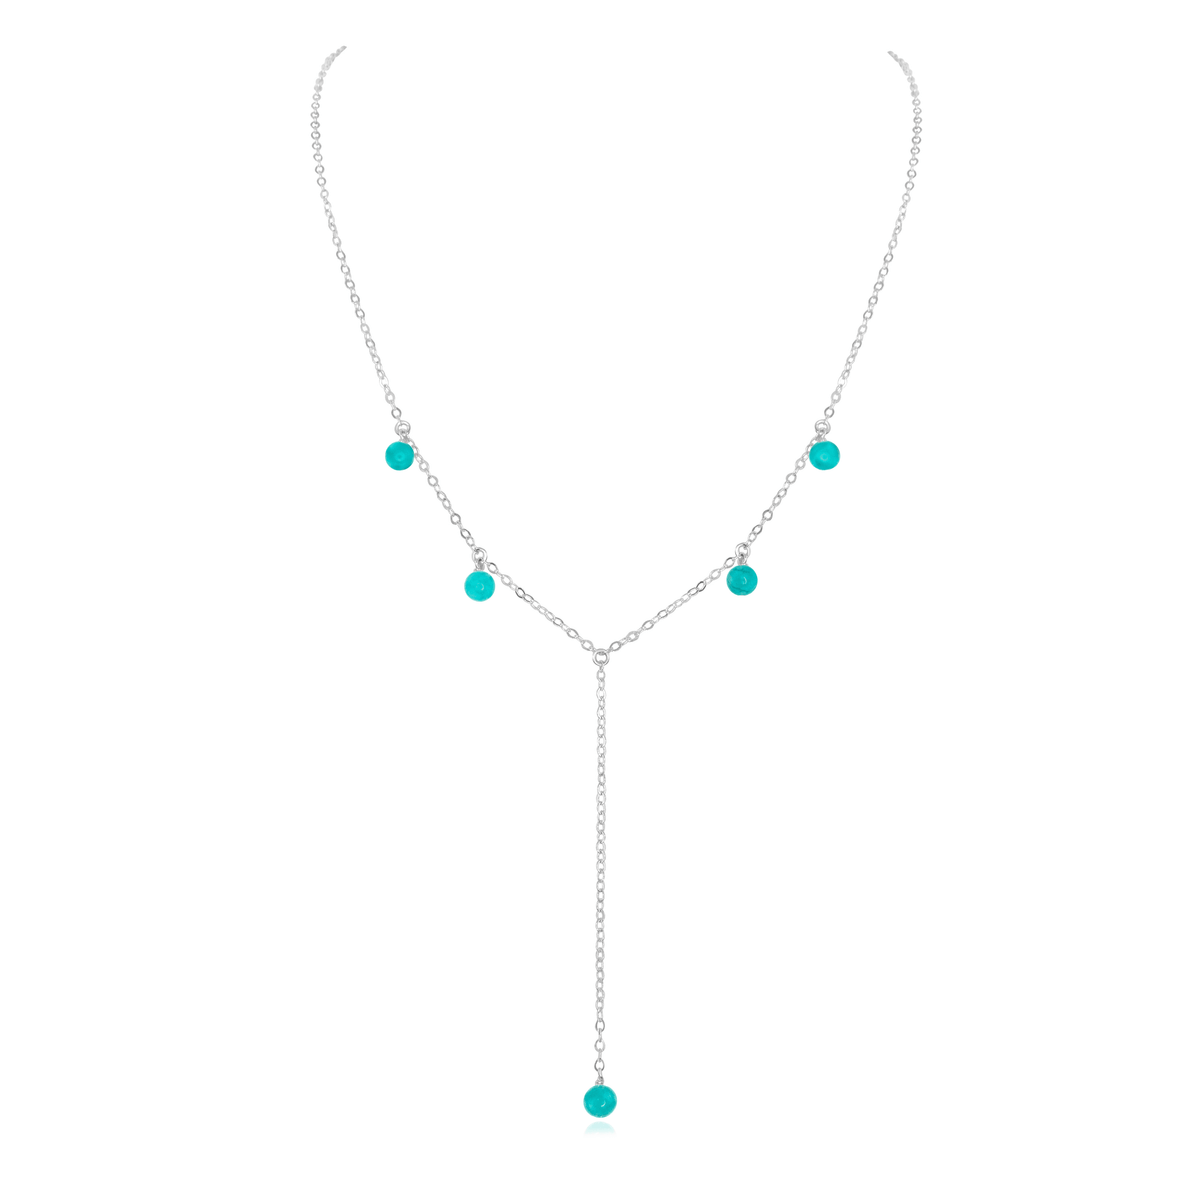 Turquoise Boho Lariat Necklace - Turquoise Boho Lariat Necklace - Sterling Silver - Luna Tide Handmade Crystal Jewellery